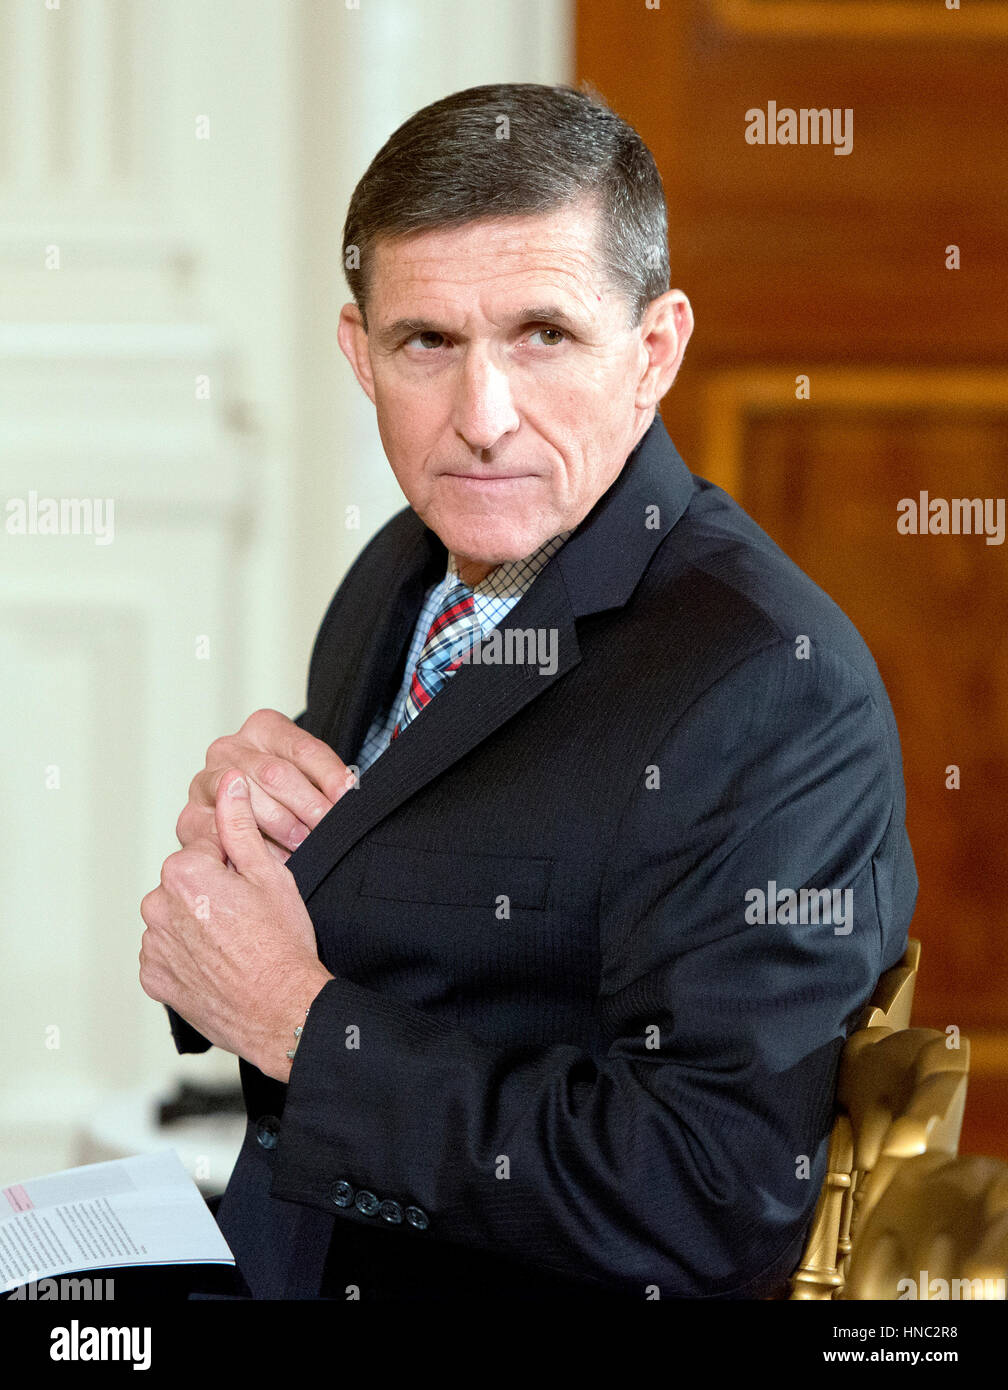 Washington DC, USA. 10th February 2017. Retired Lt. Gen. Michael T. Flynn, National Security Advisor prior to United States President Donald J. Trump conducting a joint press conference with Prime Minister Shinz? Abe of Japan in the East Room of the White Stock Photo